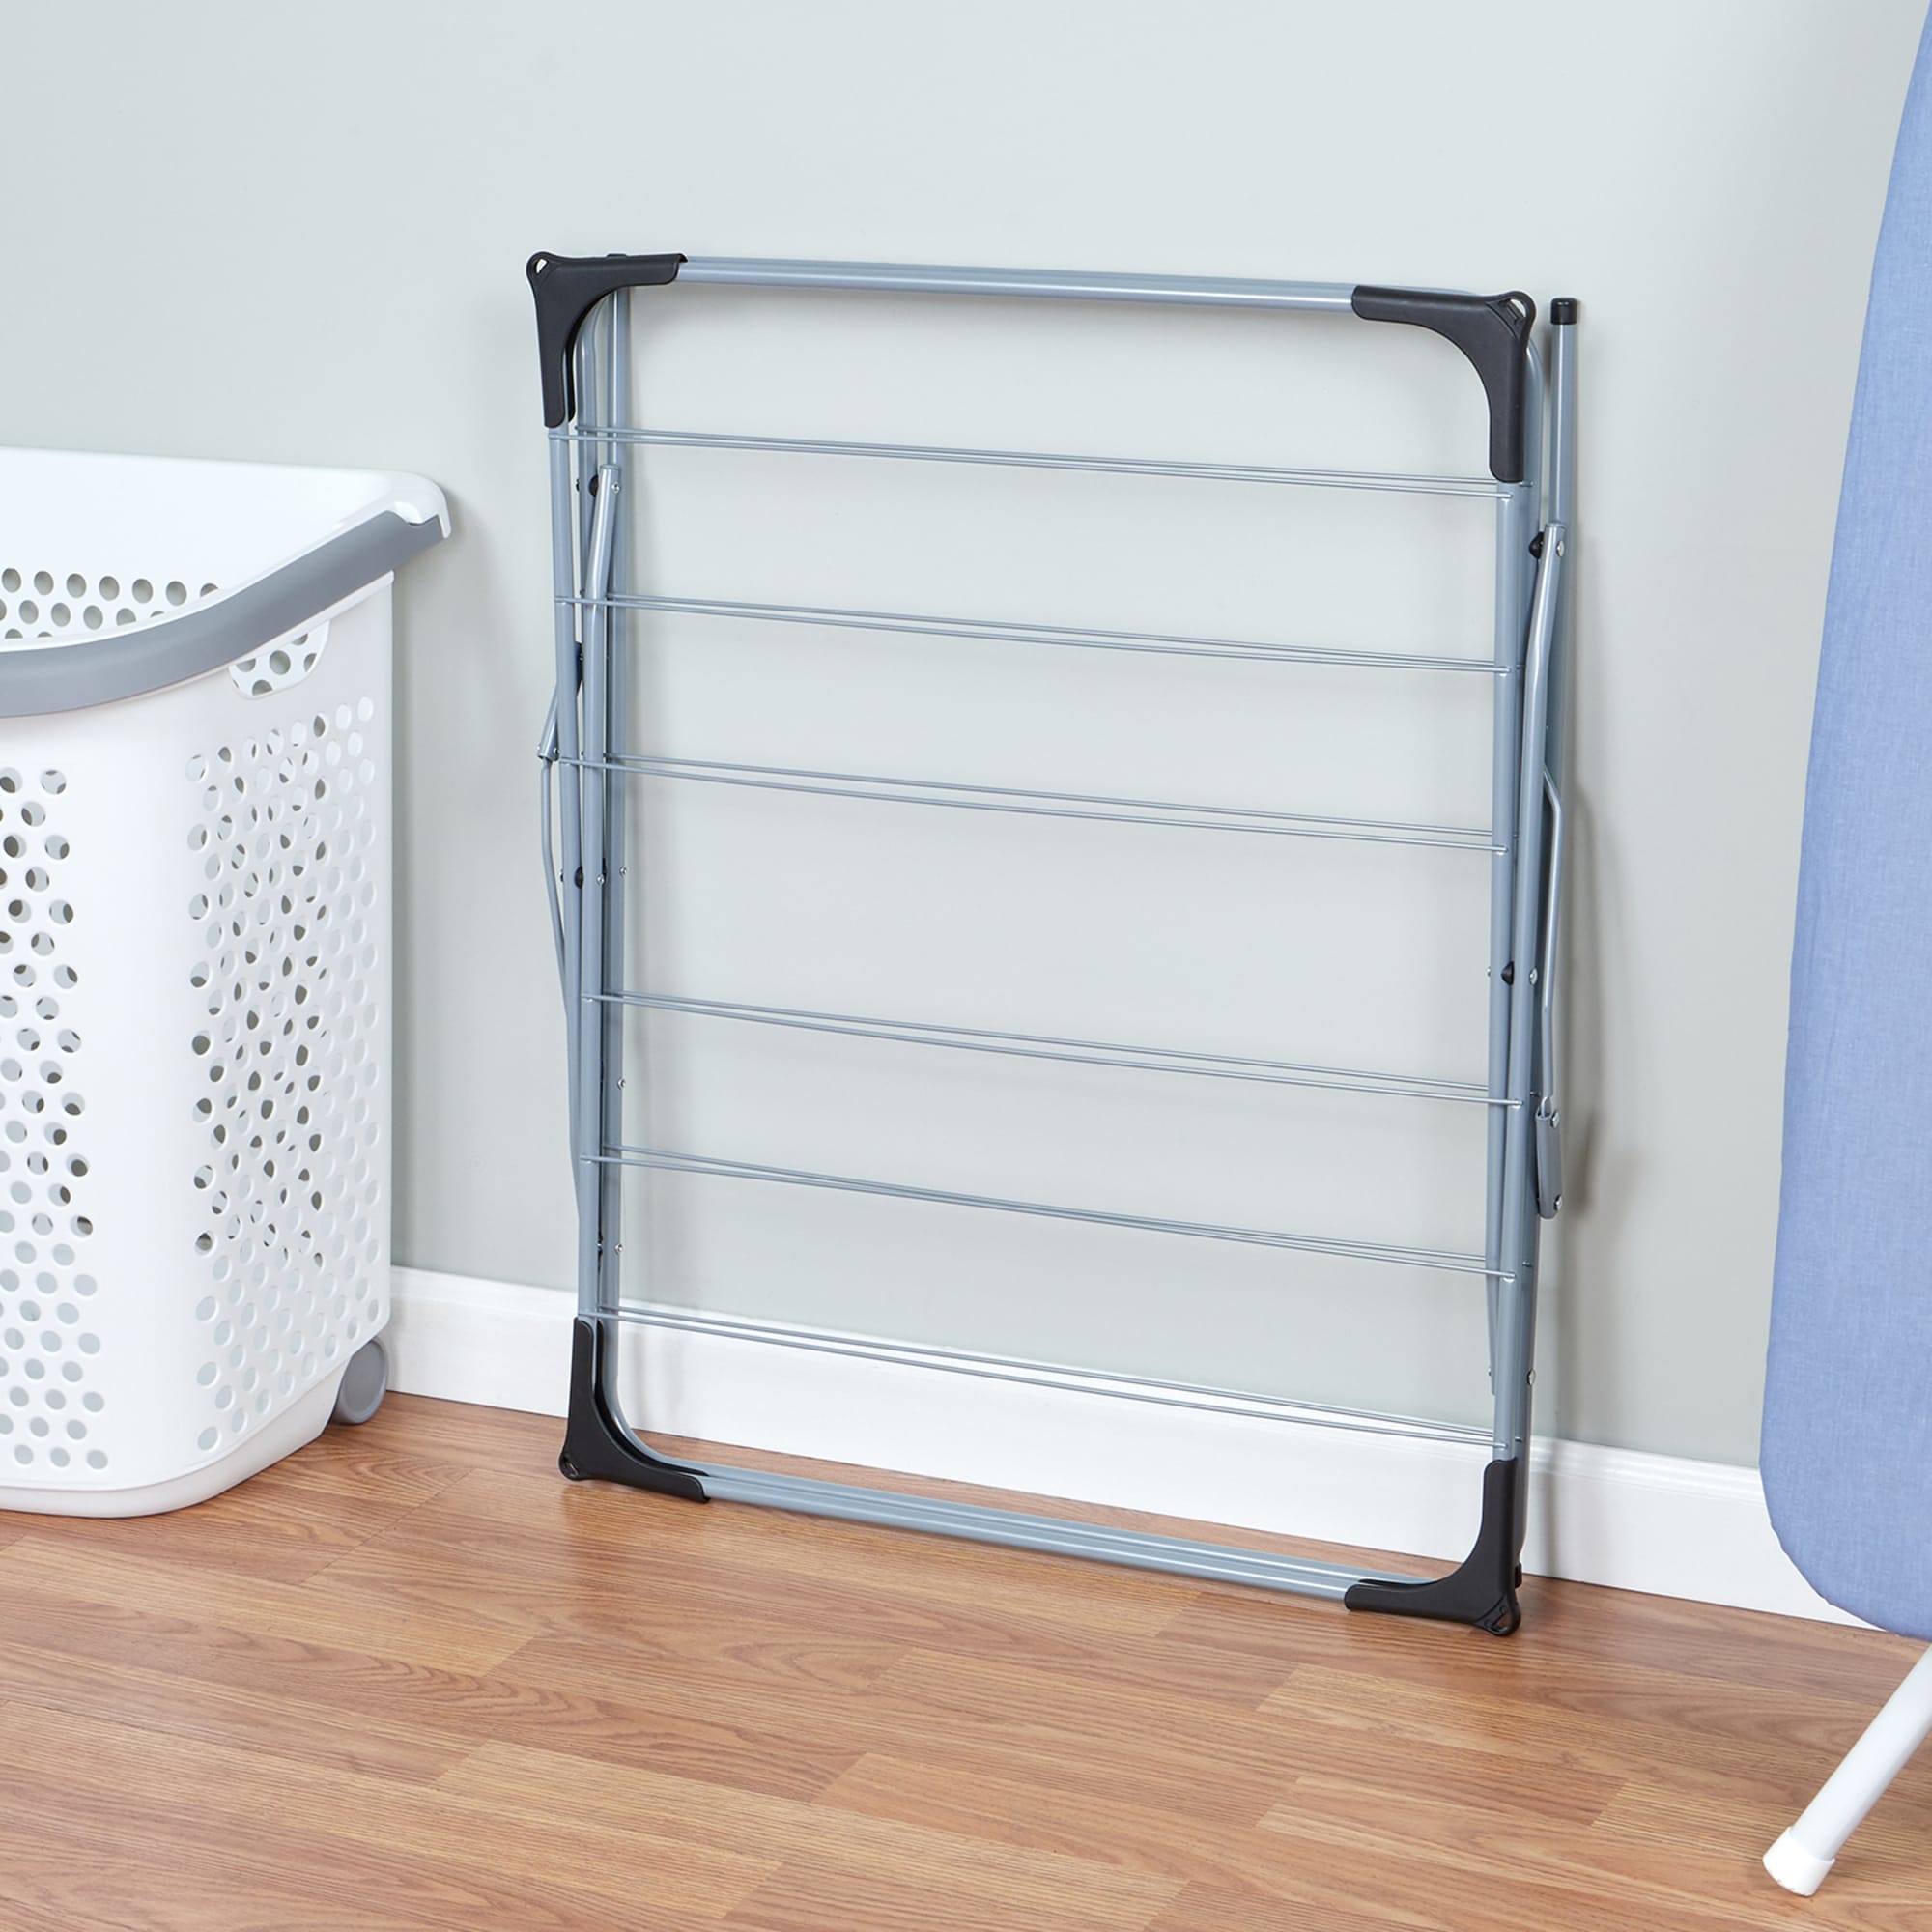 Home Basics 2-Tier Steel Clothes Dryer $12.00 EACH, CASE PACK OF 6